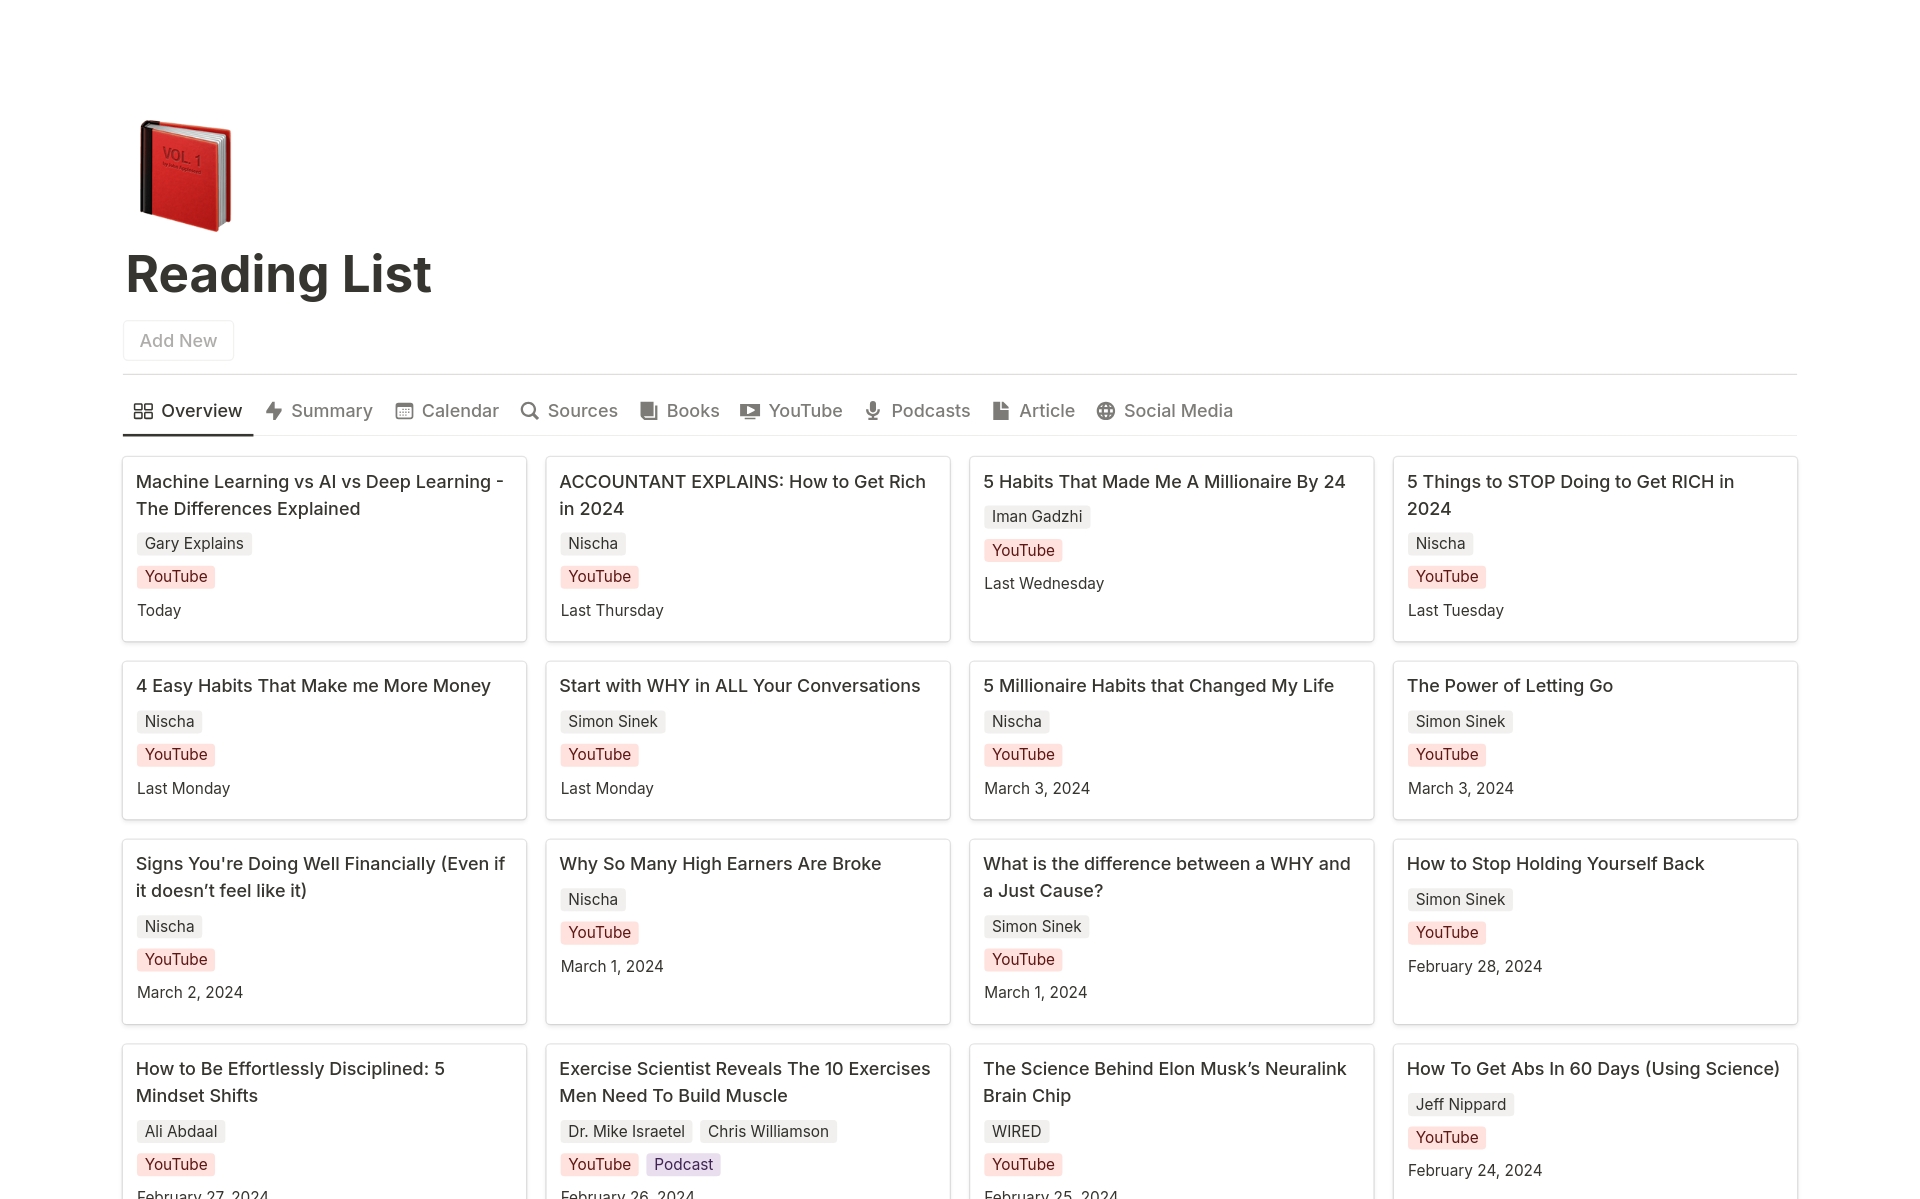 A dashboard to track books, articles, podcasts, and videos